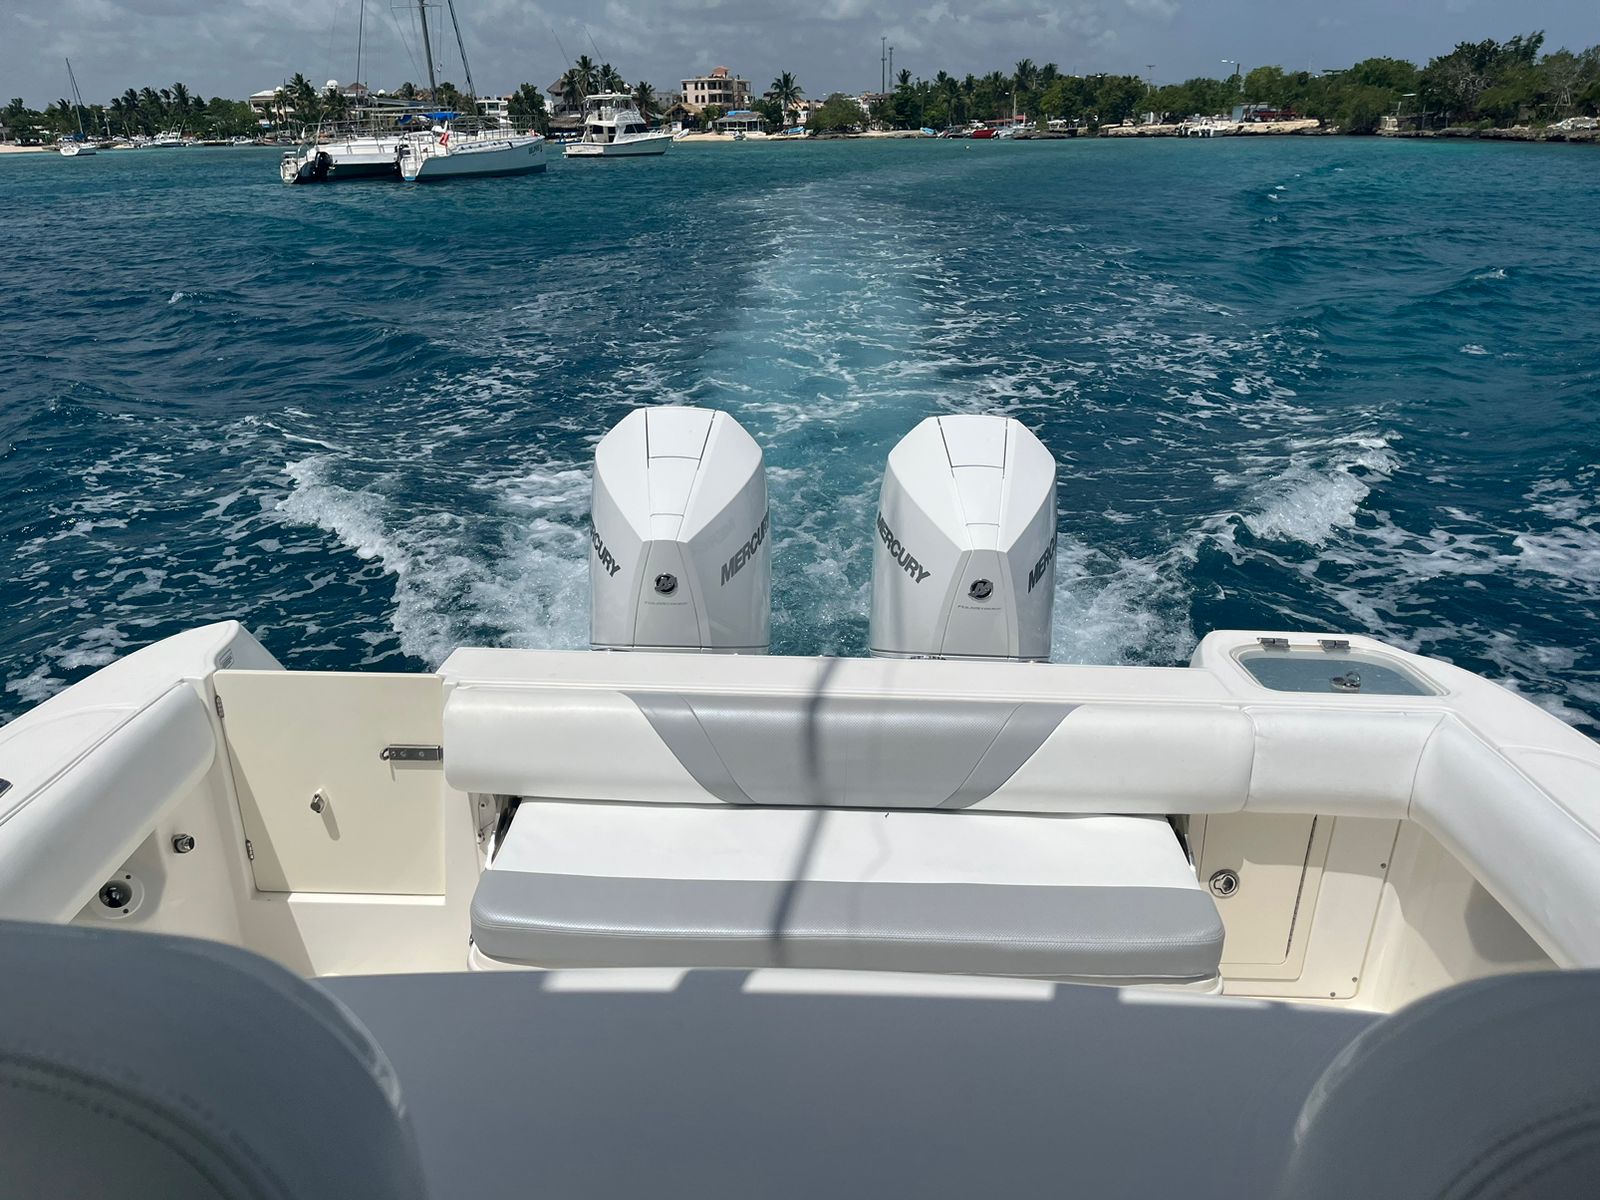 7828826323_speedboat_Boston_Whaler_for_Private_Rentals_from_Bayahibe_to_Saona_or_Catalina_islands.jpeg